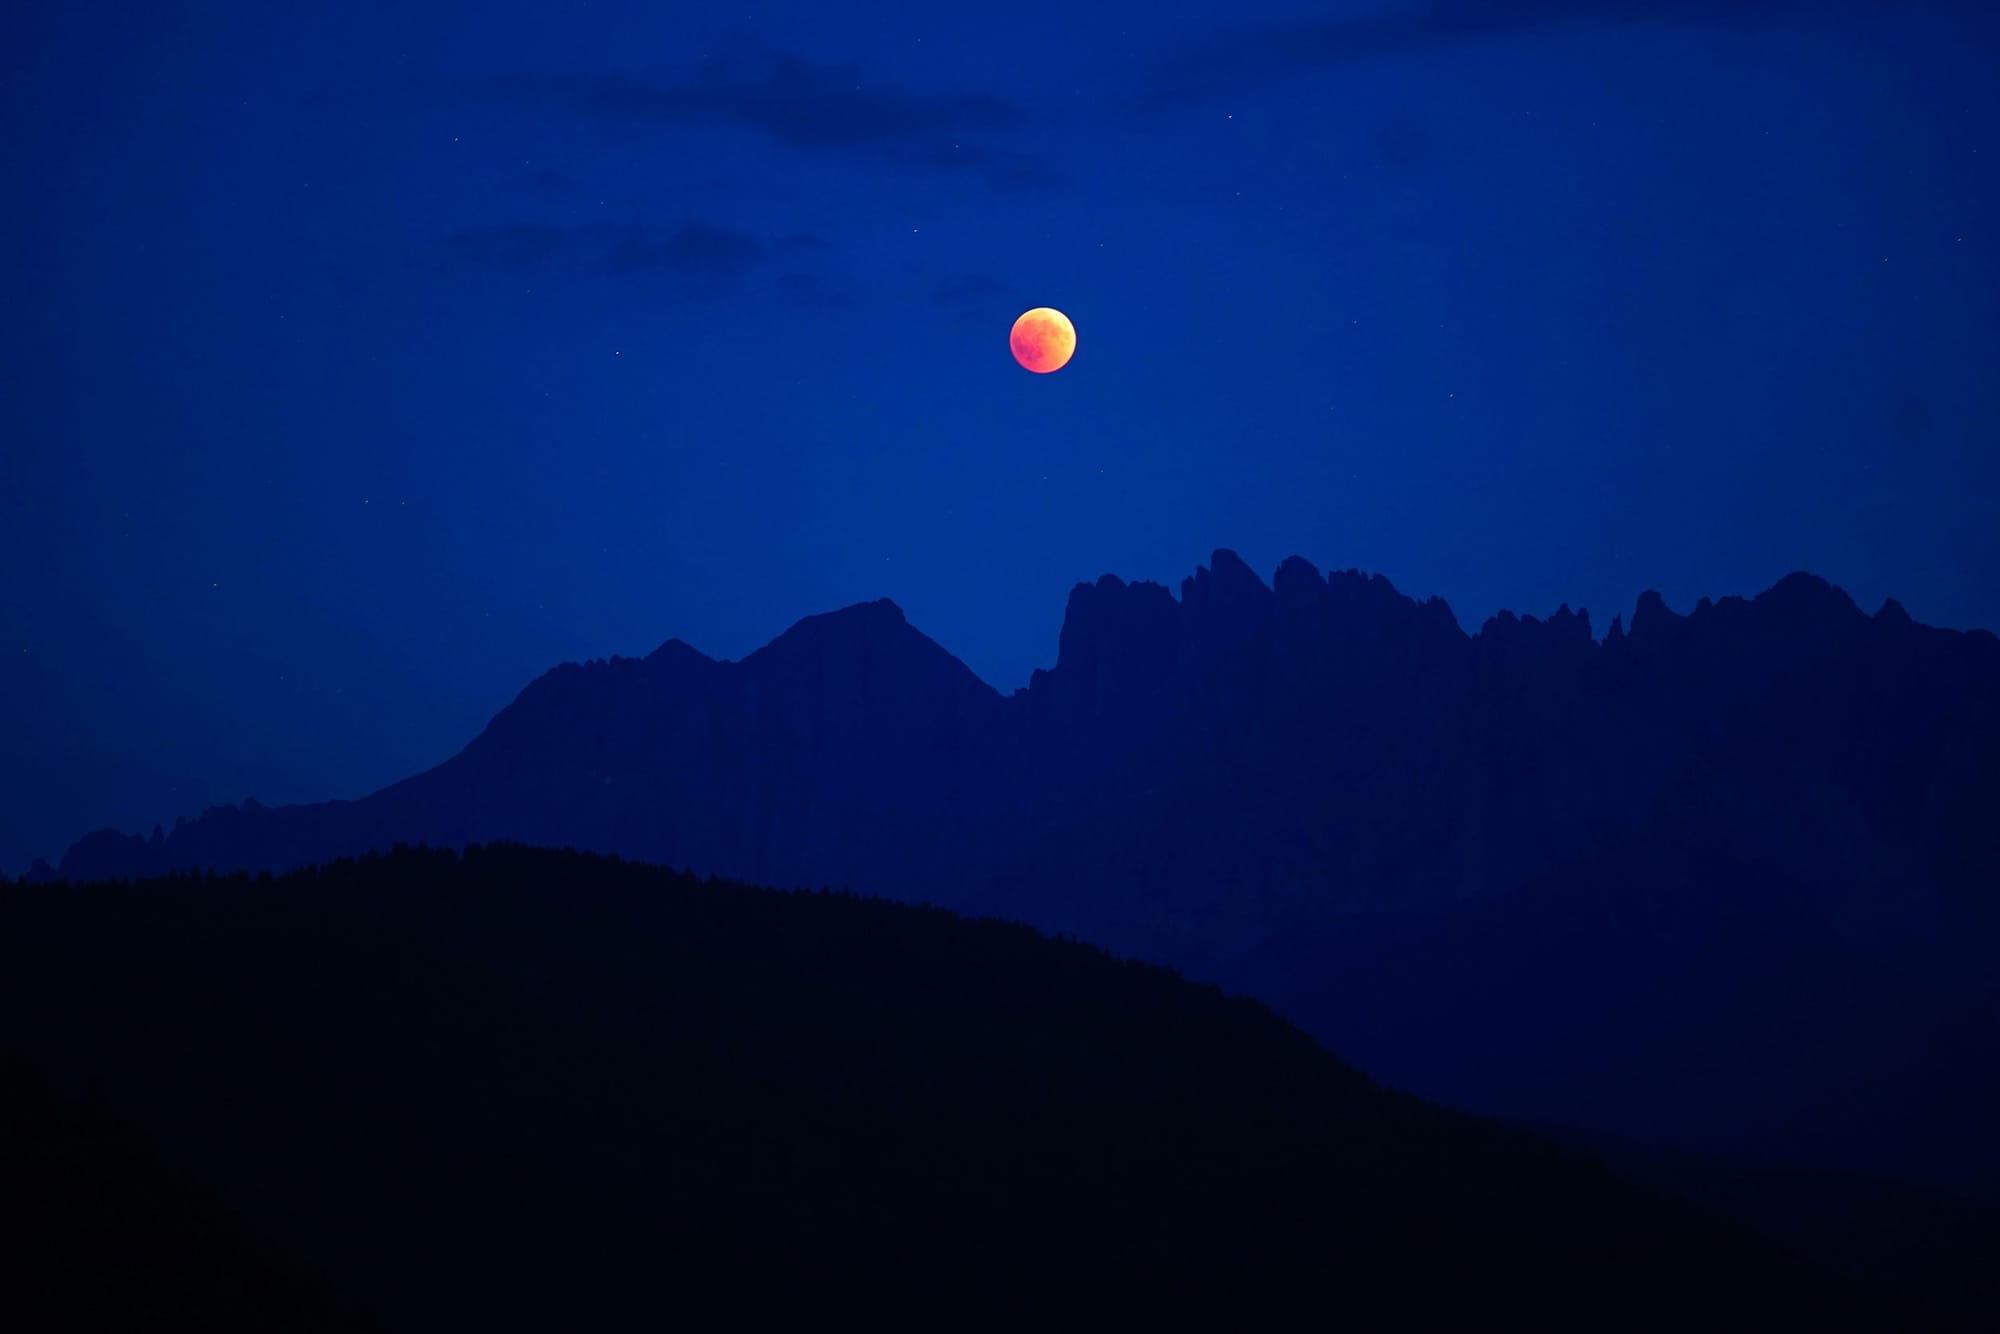 Lunar eclipse showing red moon on purple sky background with dramatic jutting mountain range silhouetted beneath